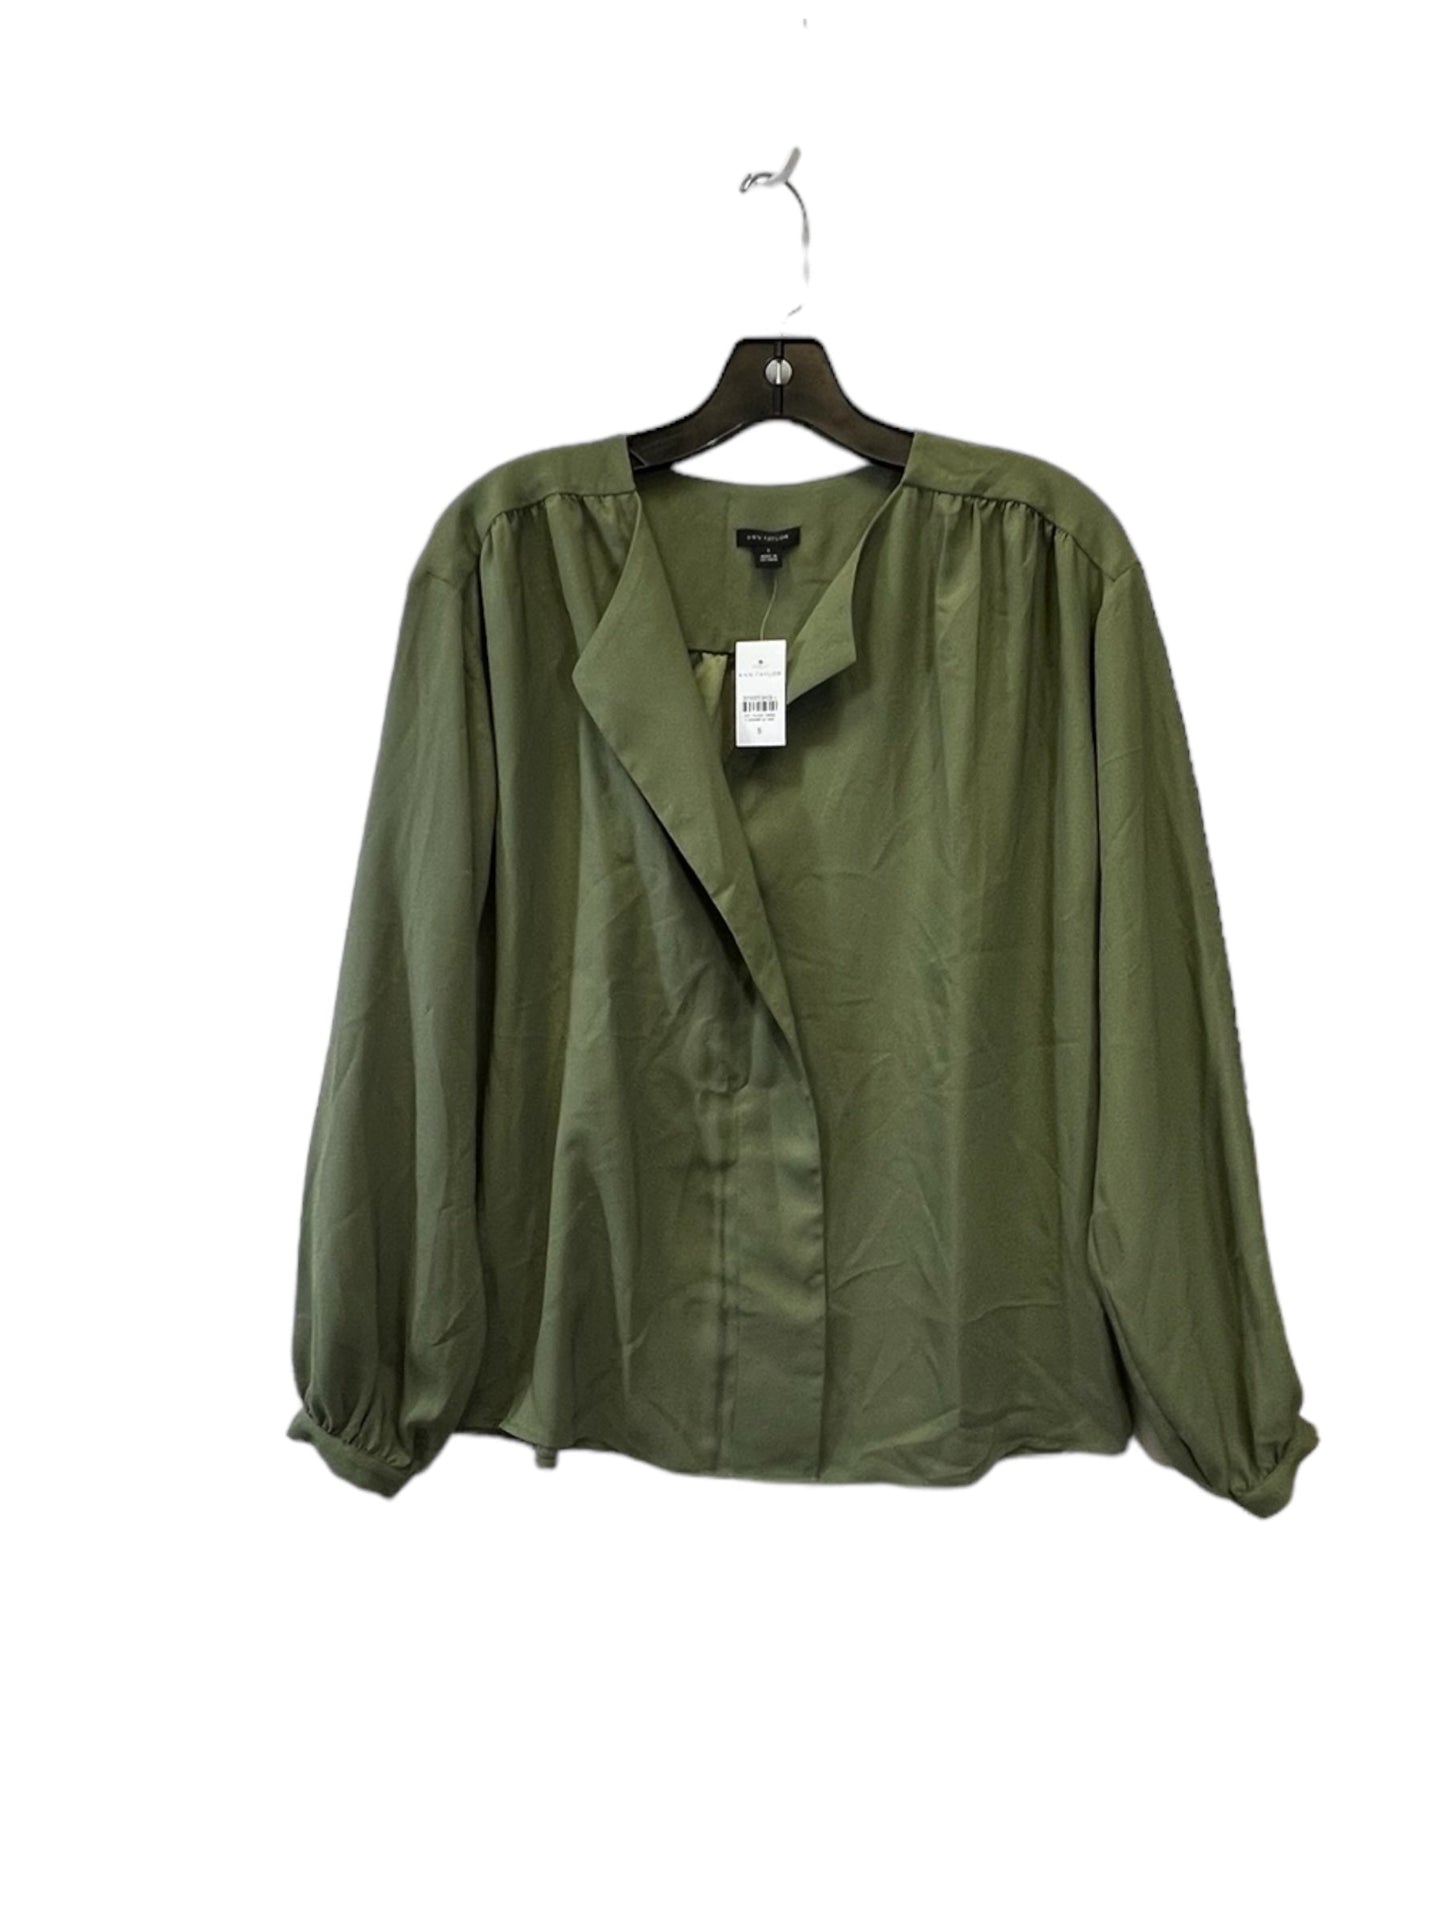 Green Top Long Sleeve Ann Taylor, Size S